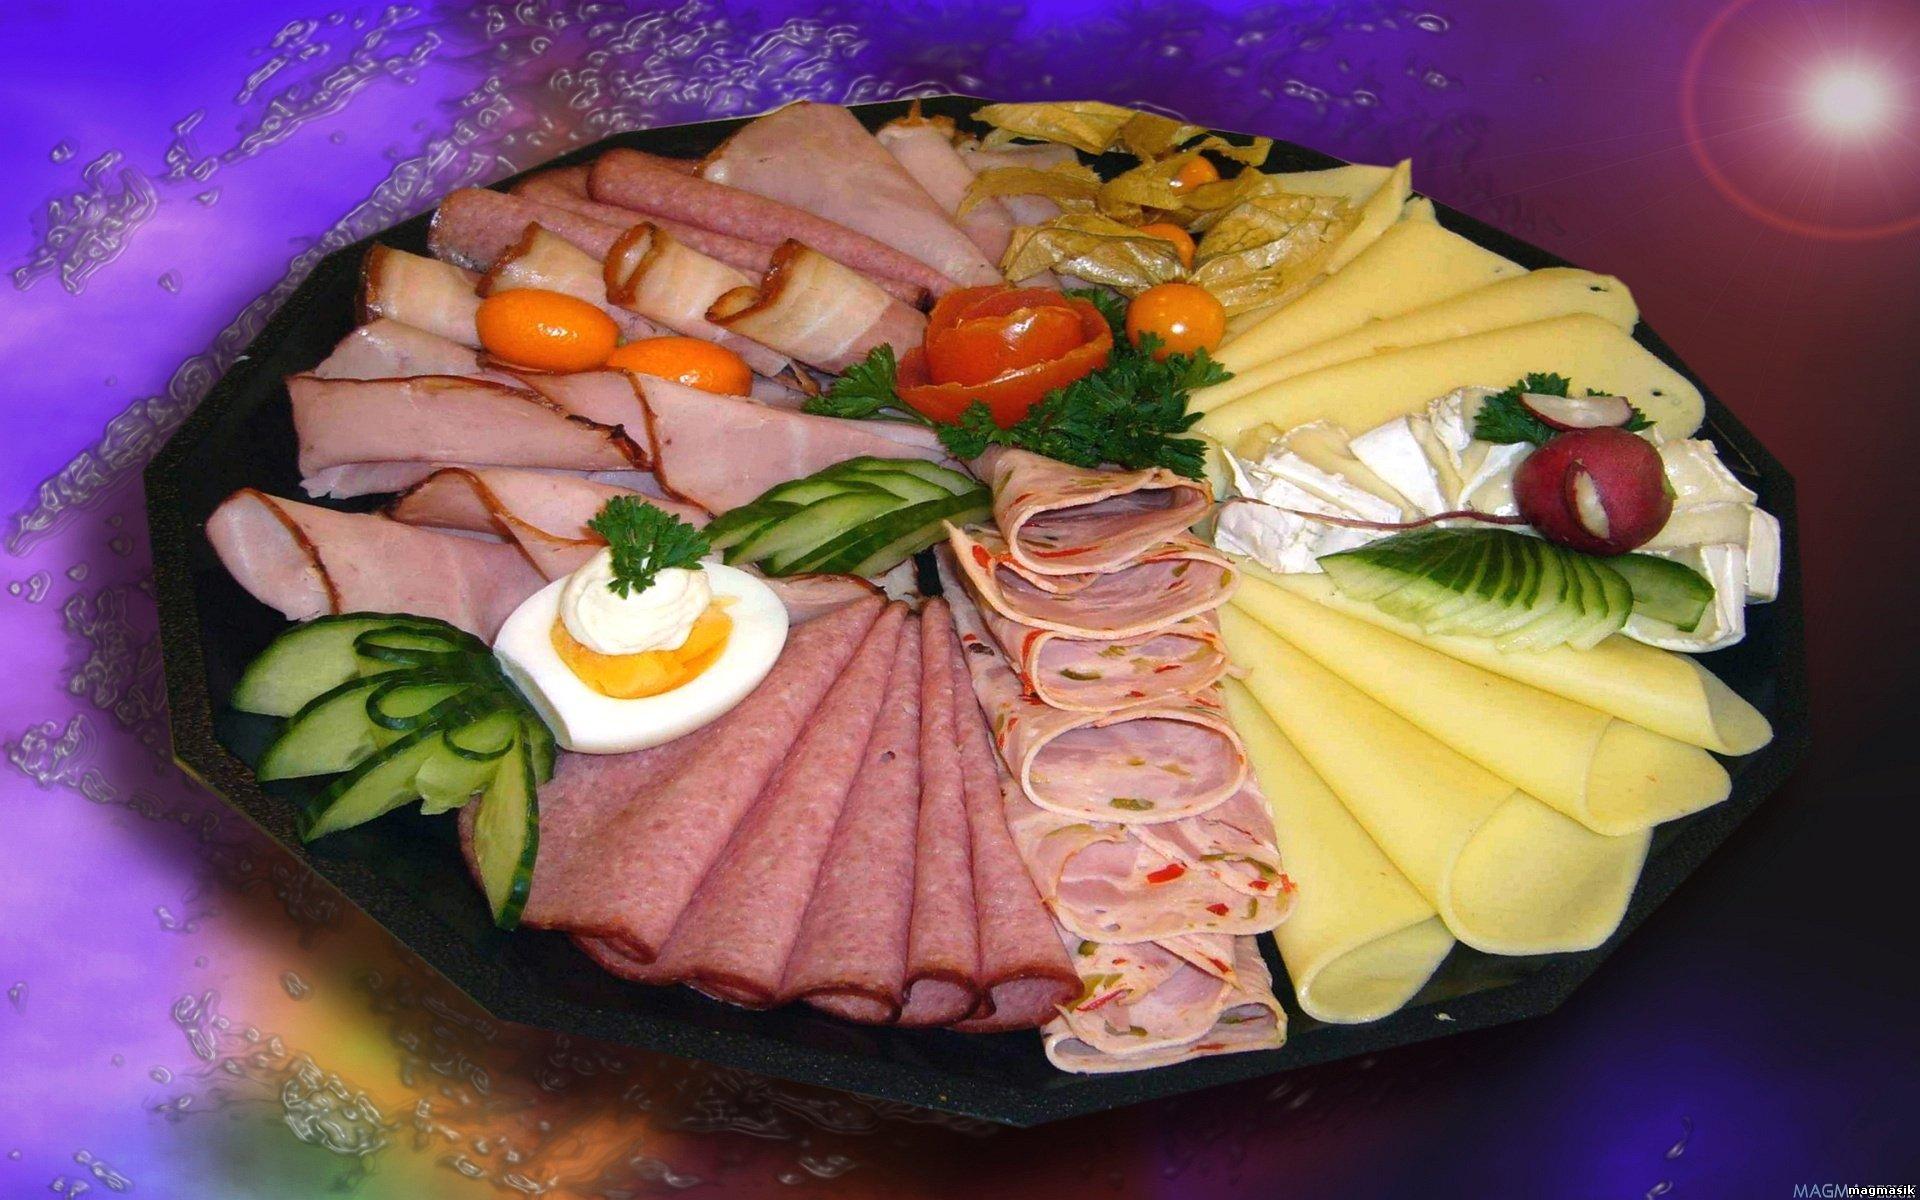 Image Ham Food Meat products The second dishes